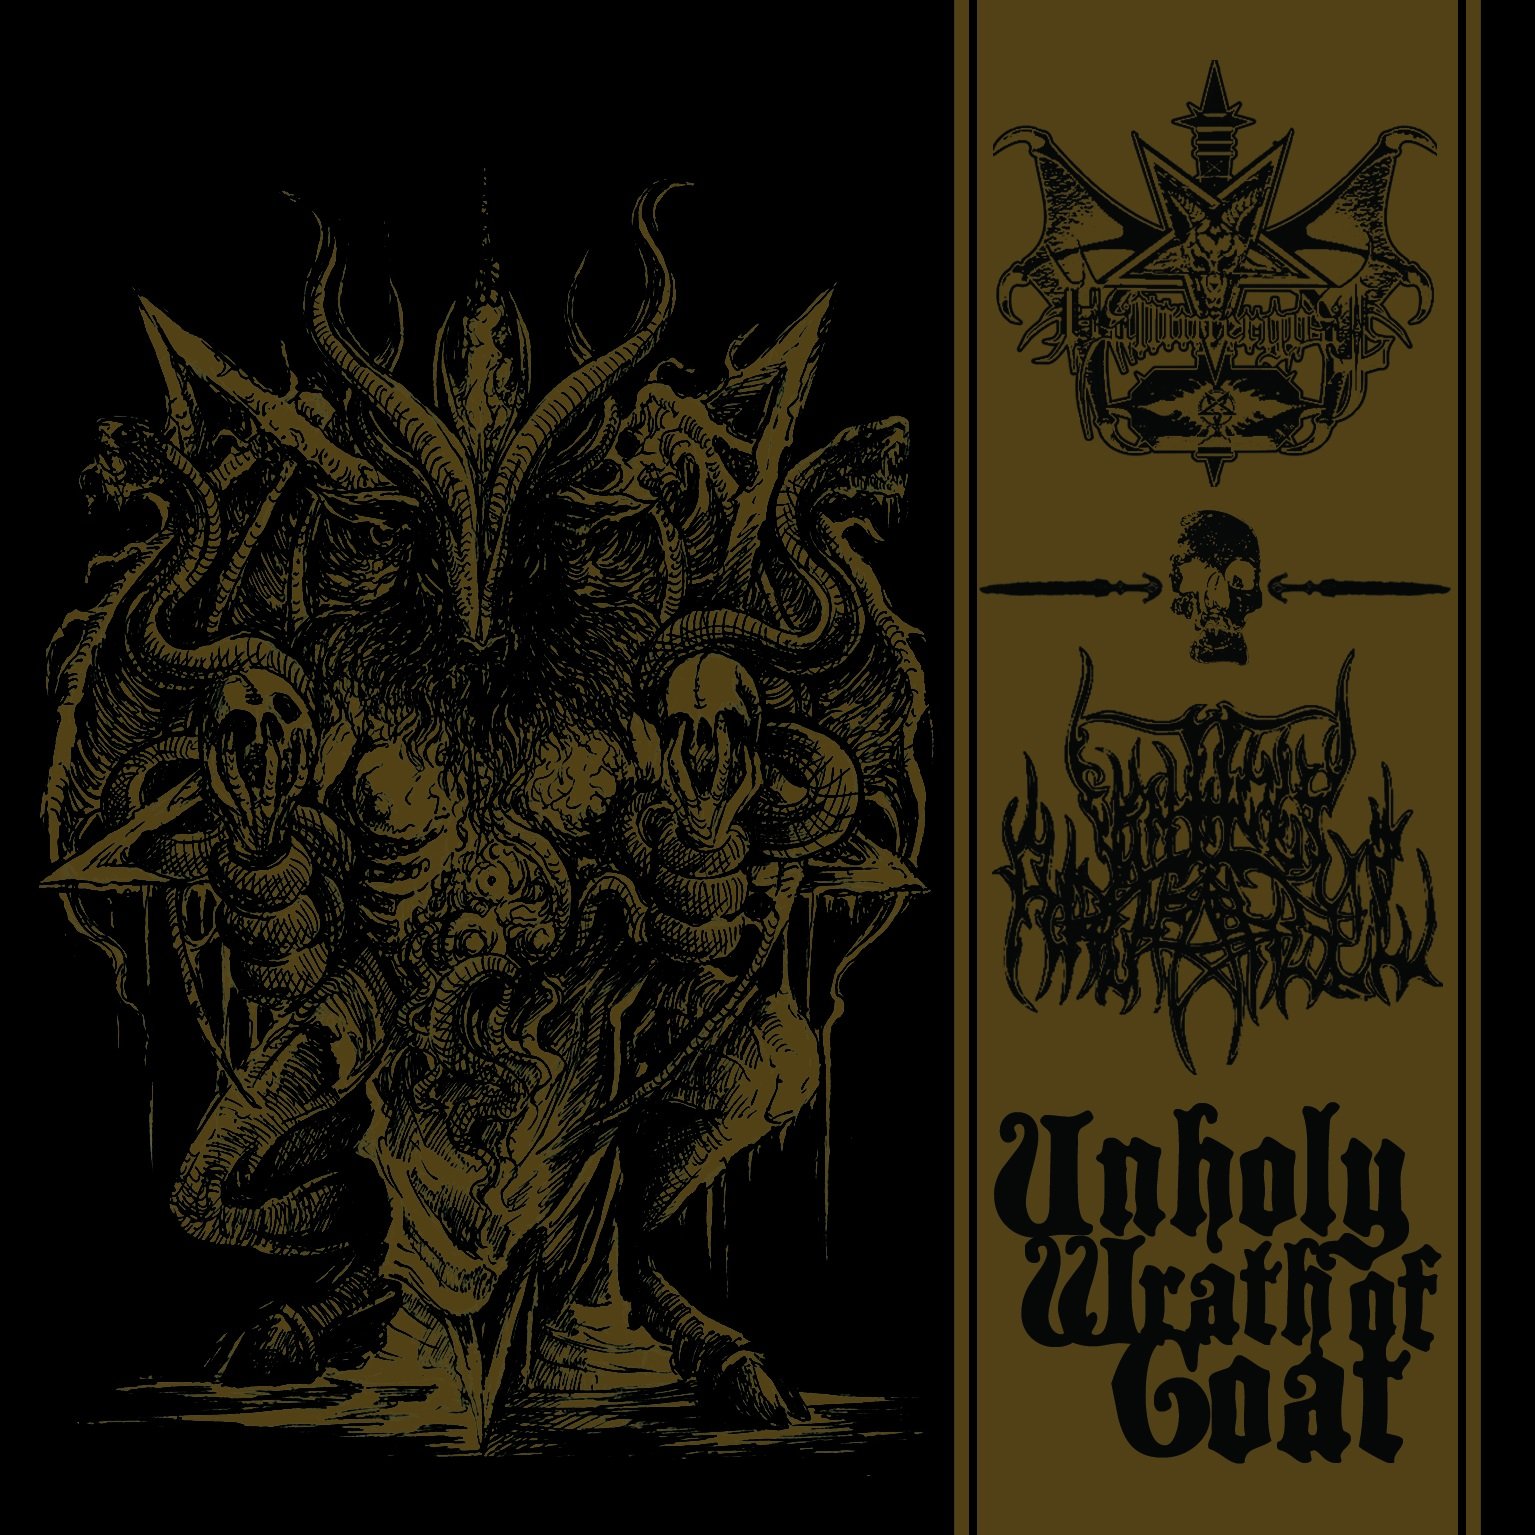 Hammergoat - Unholy Wrath of Goat (2019) FLAC Download